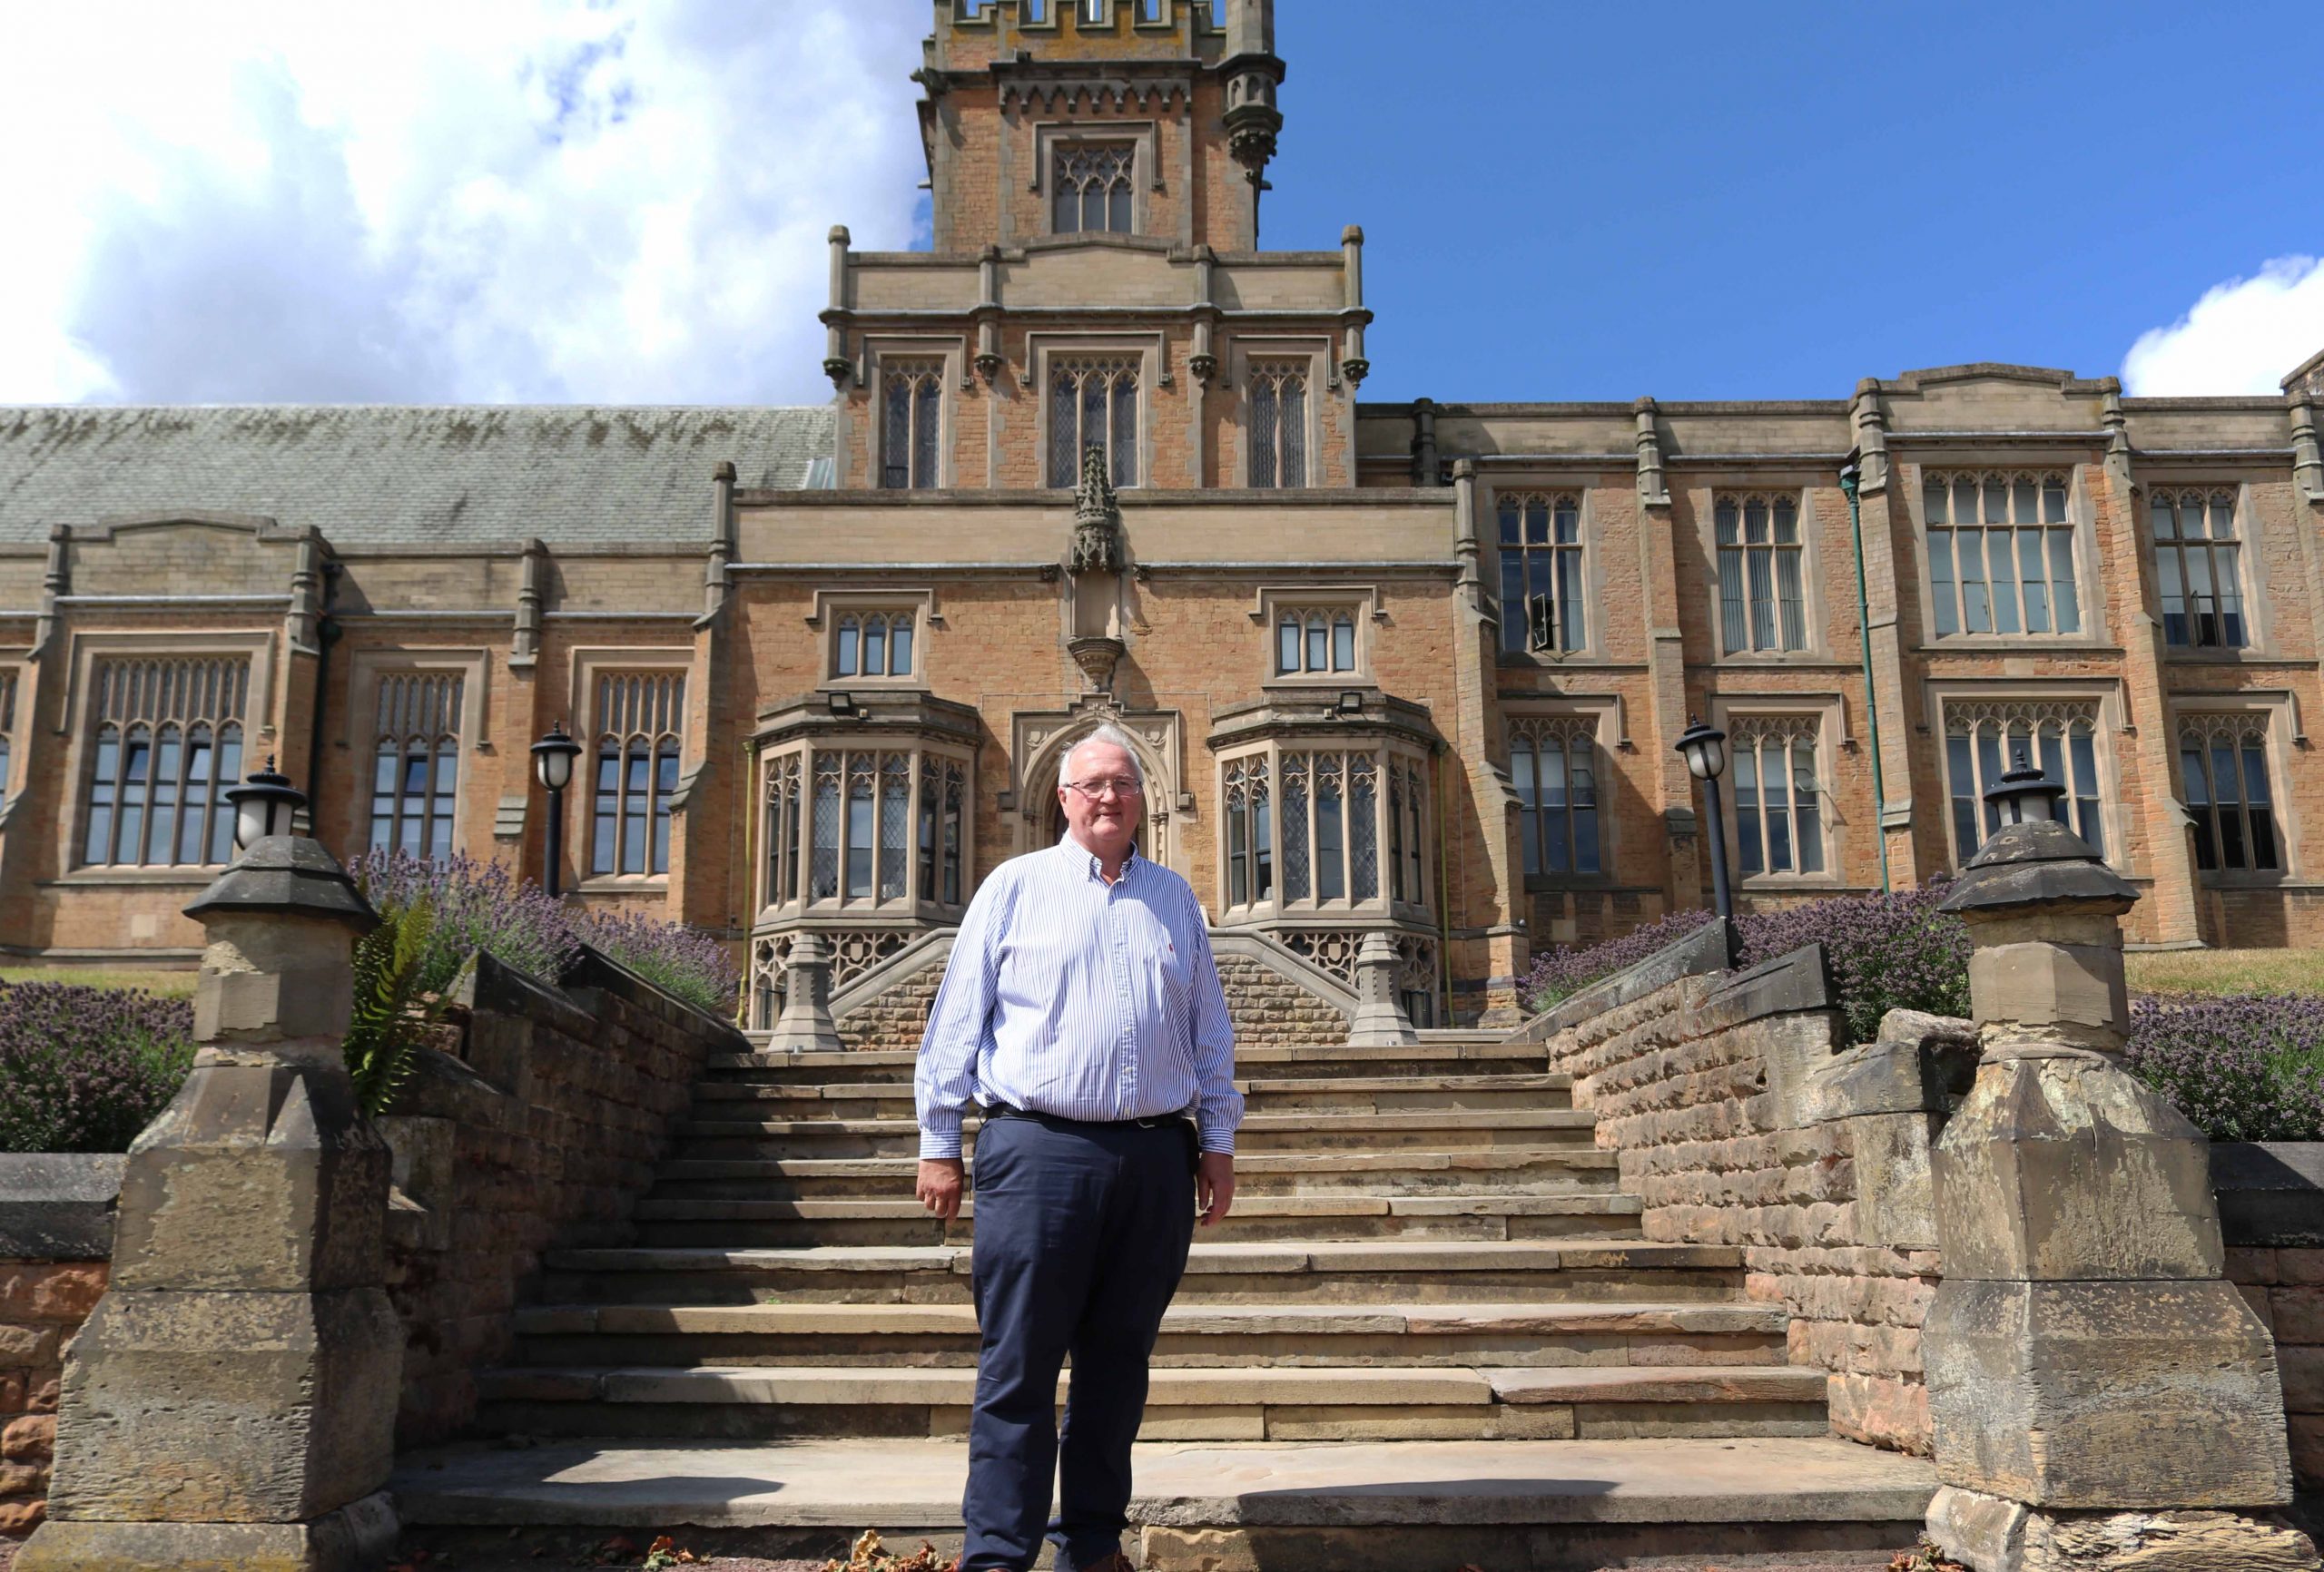 David Wild stood on the steps of the front of school